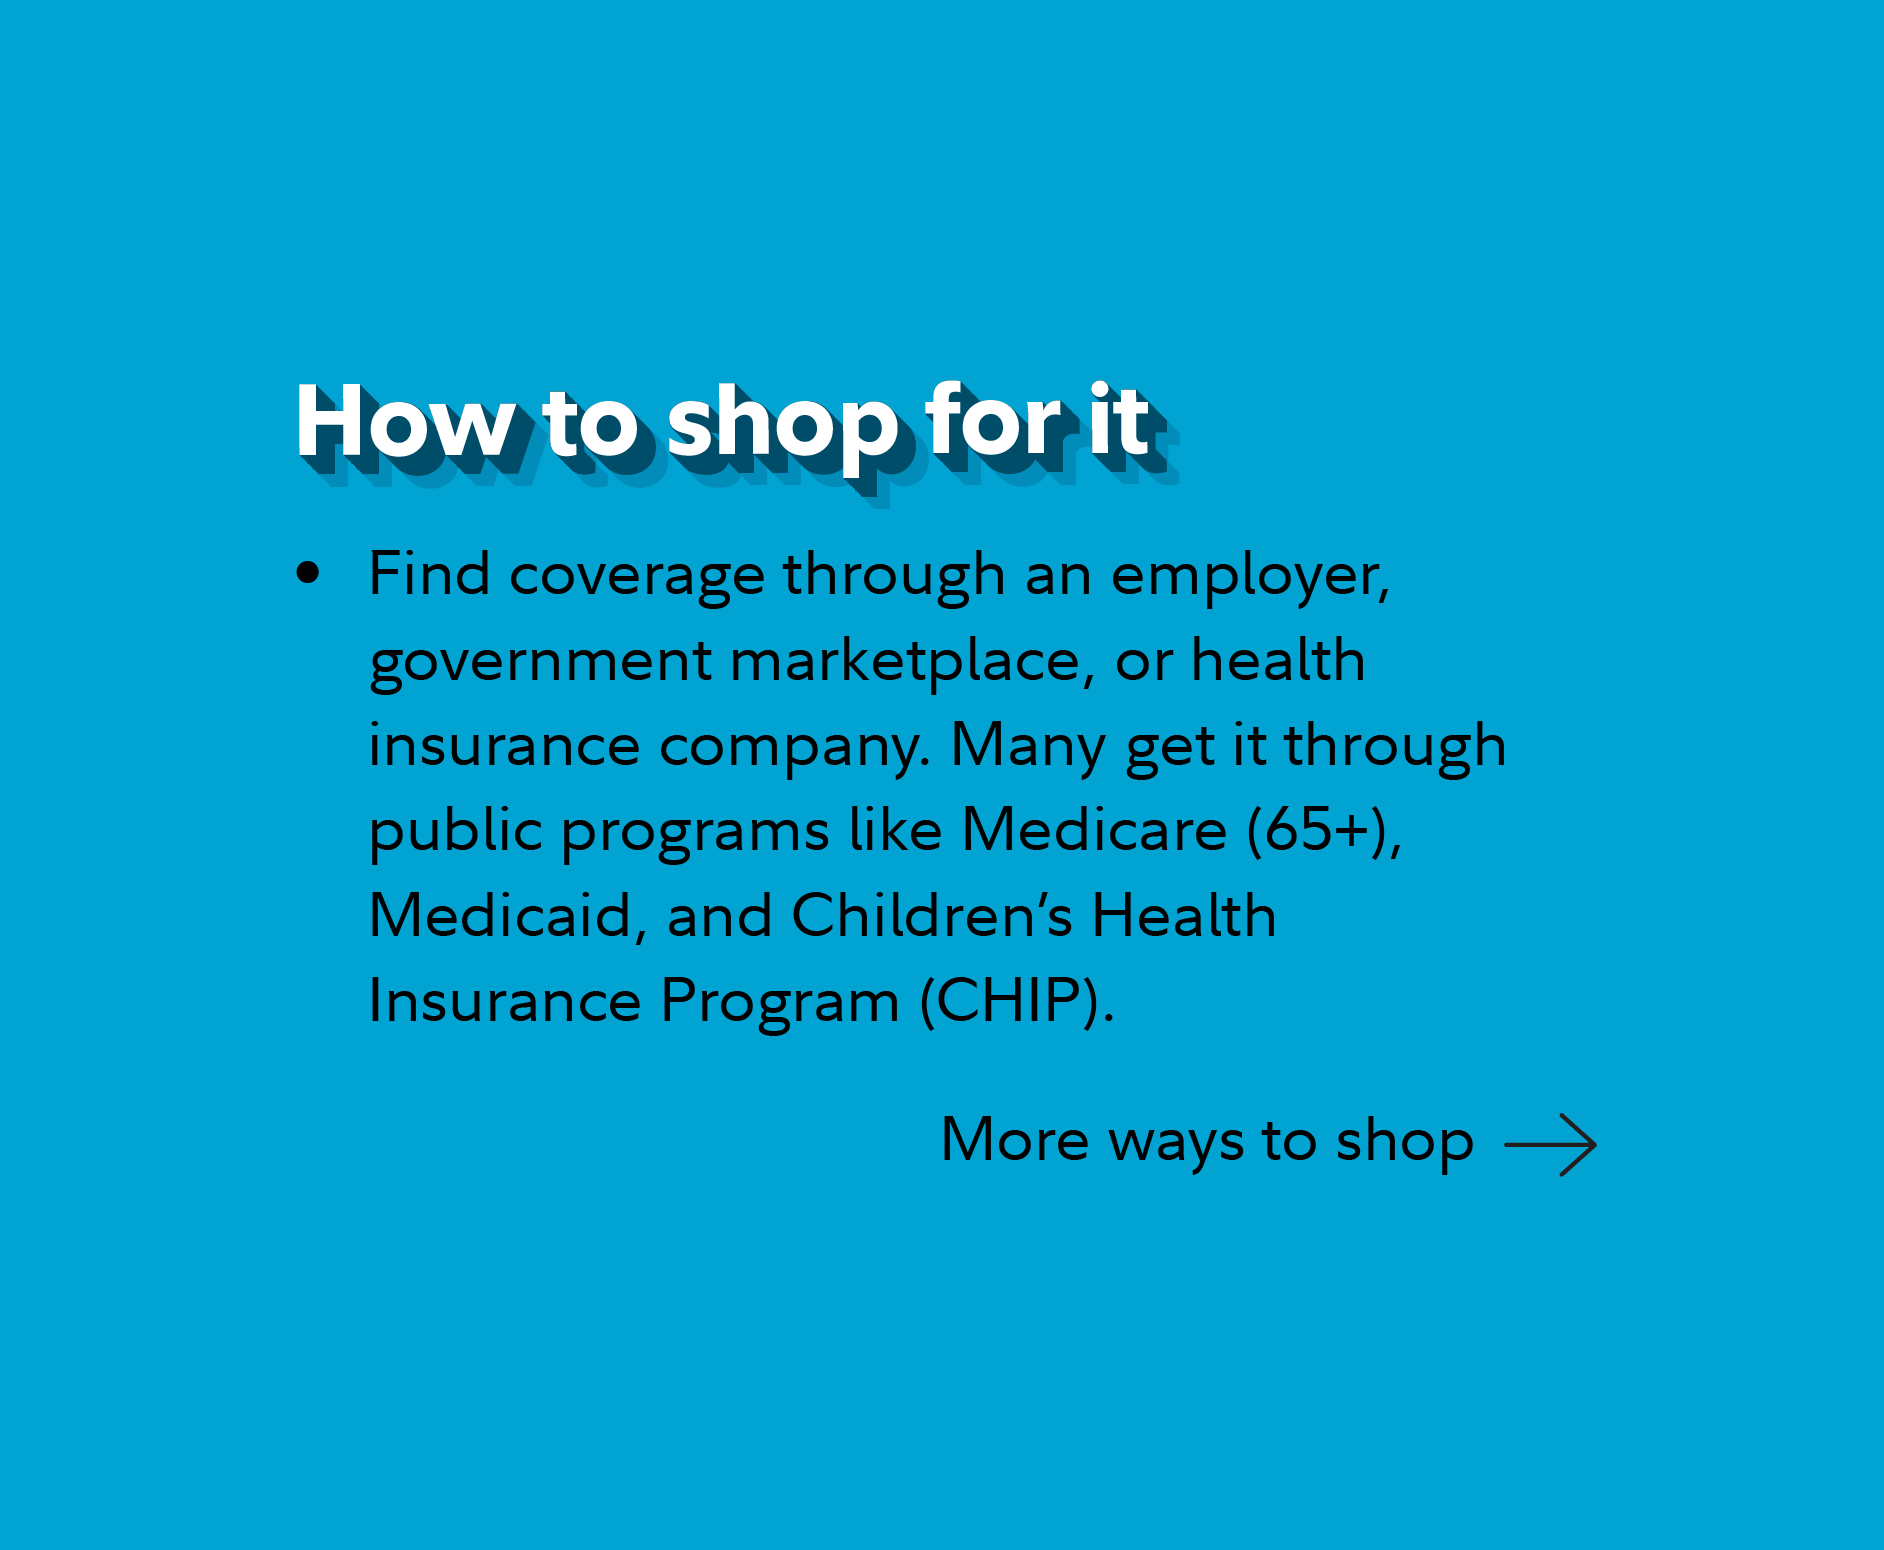 How to shop for it. Find coverage through an employer, government marketplace, or health insurance company. Many get it through public programs like Medicare (65+), Medicaid, and Children's Health Insurance Program (CHIP). Continue for more ways to shop.